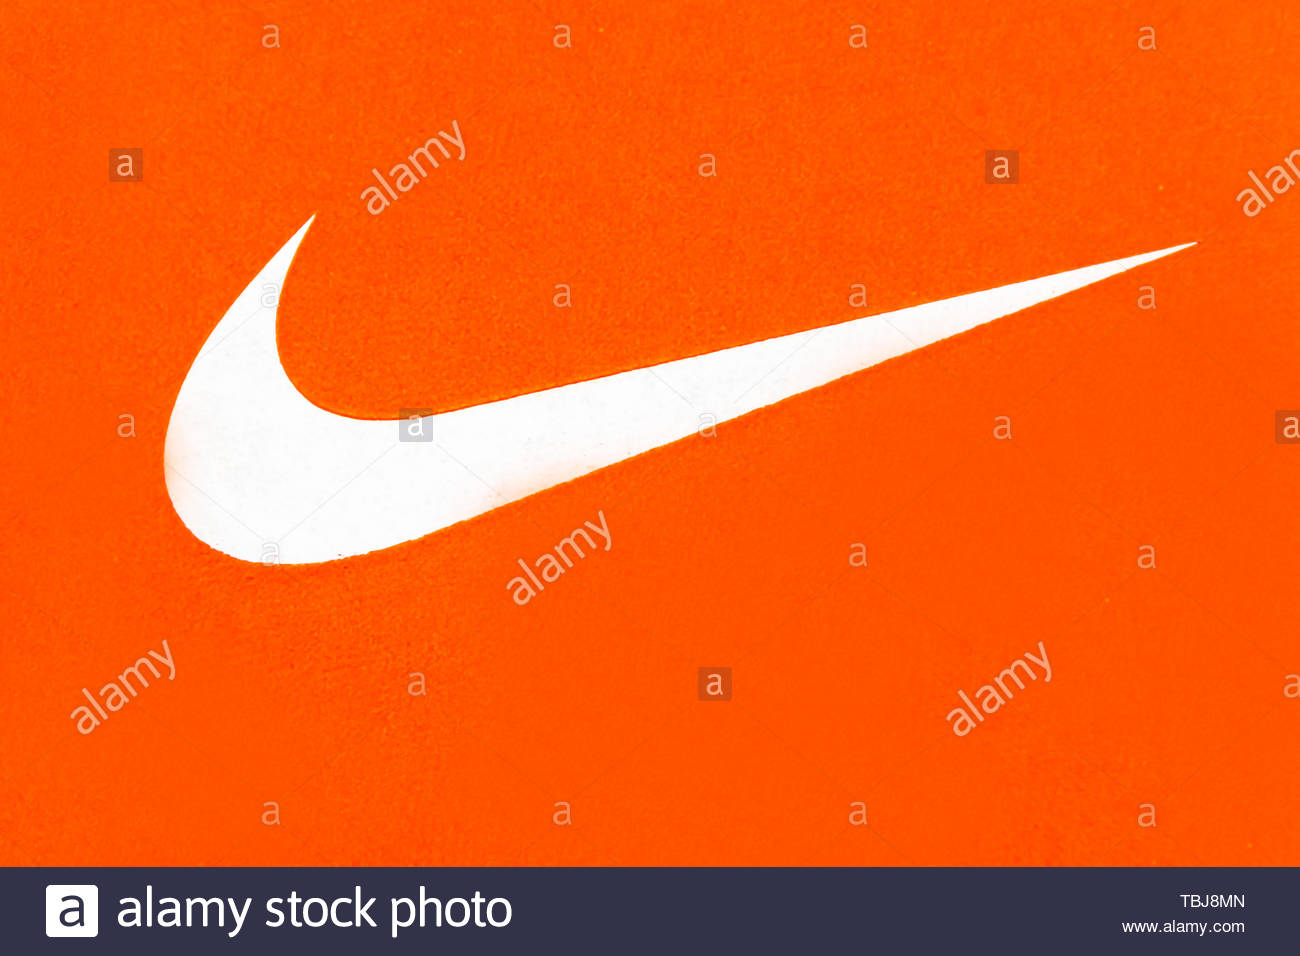 Nike Symbol High Resolution Stock Photography and Images - Alamy